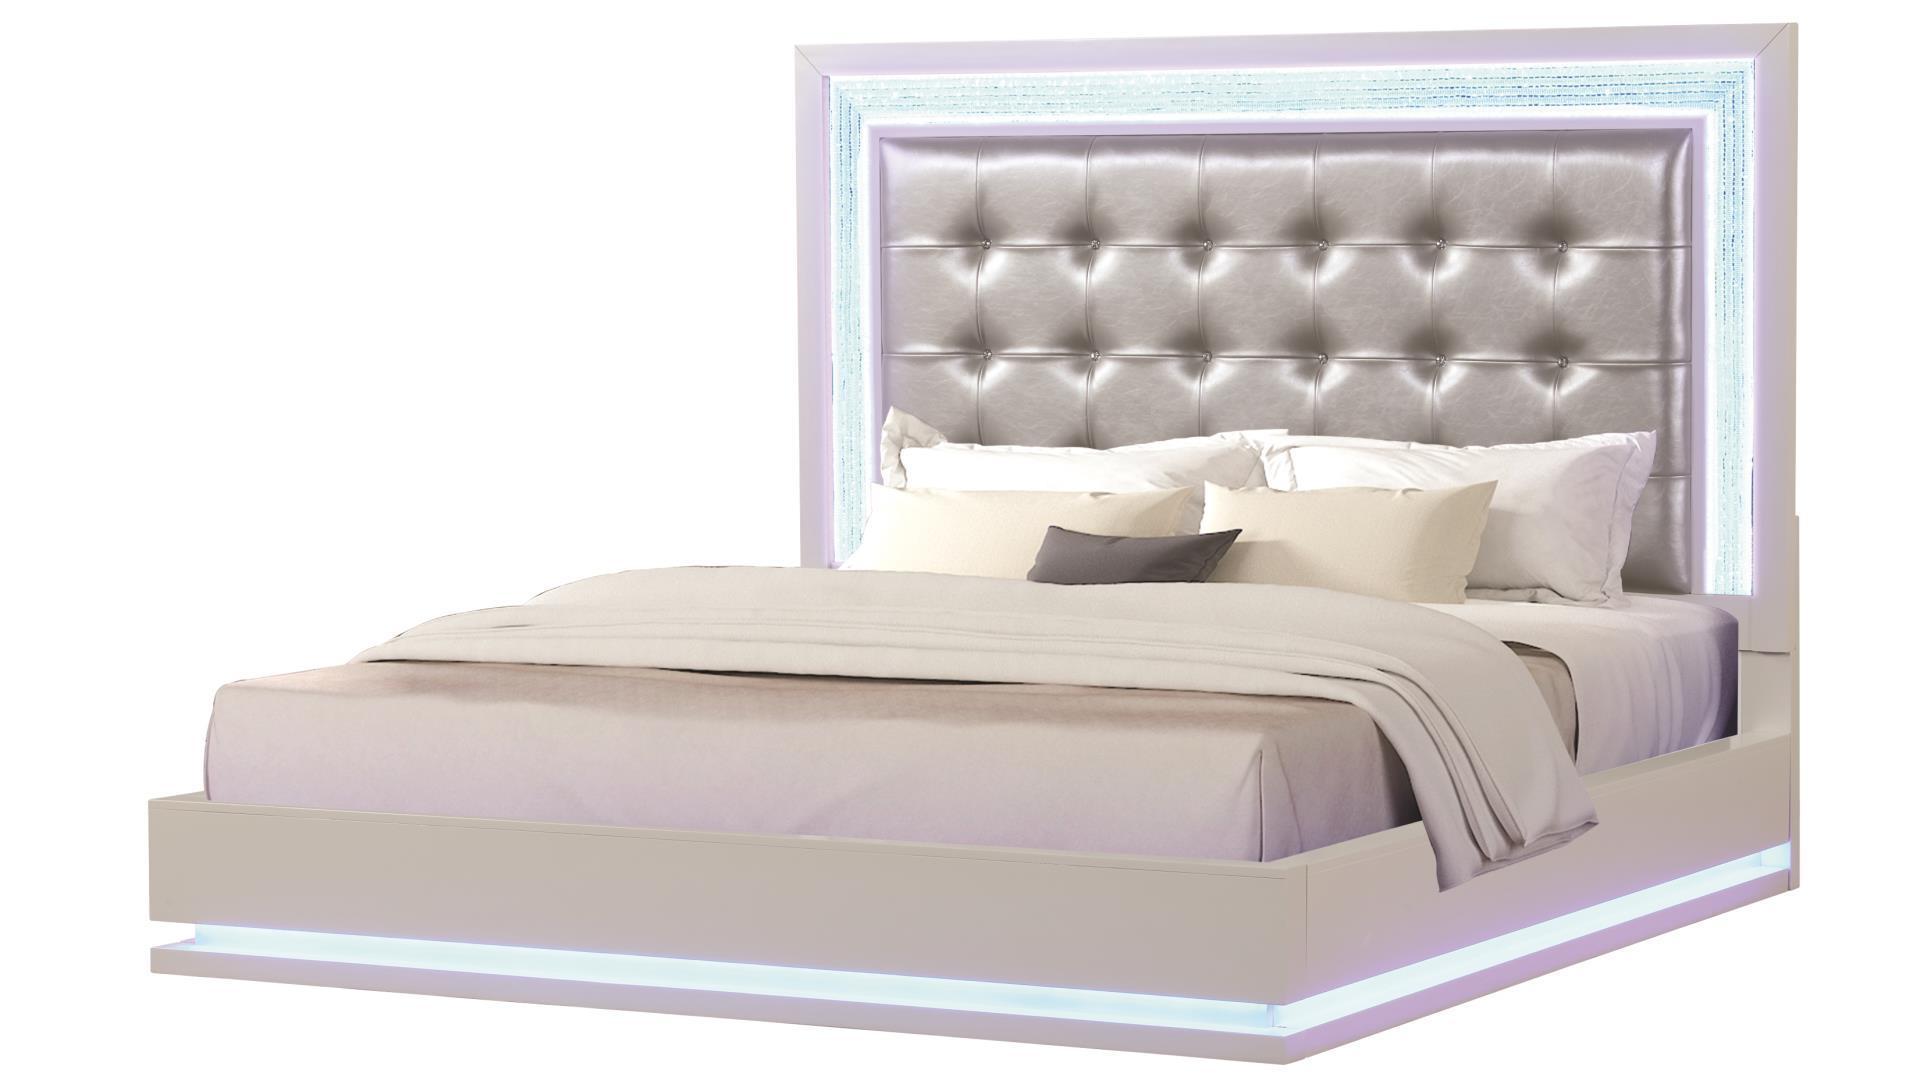 

    
Milky White Tufted King Led Bed Set w/Vanity 5P PASSION Galaxy Home Contemporary
